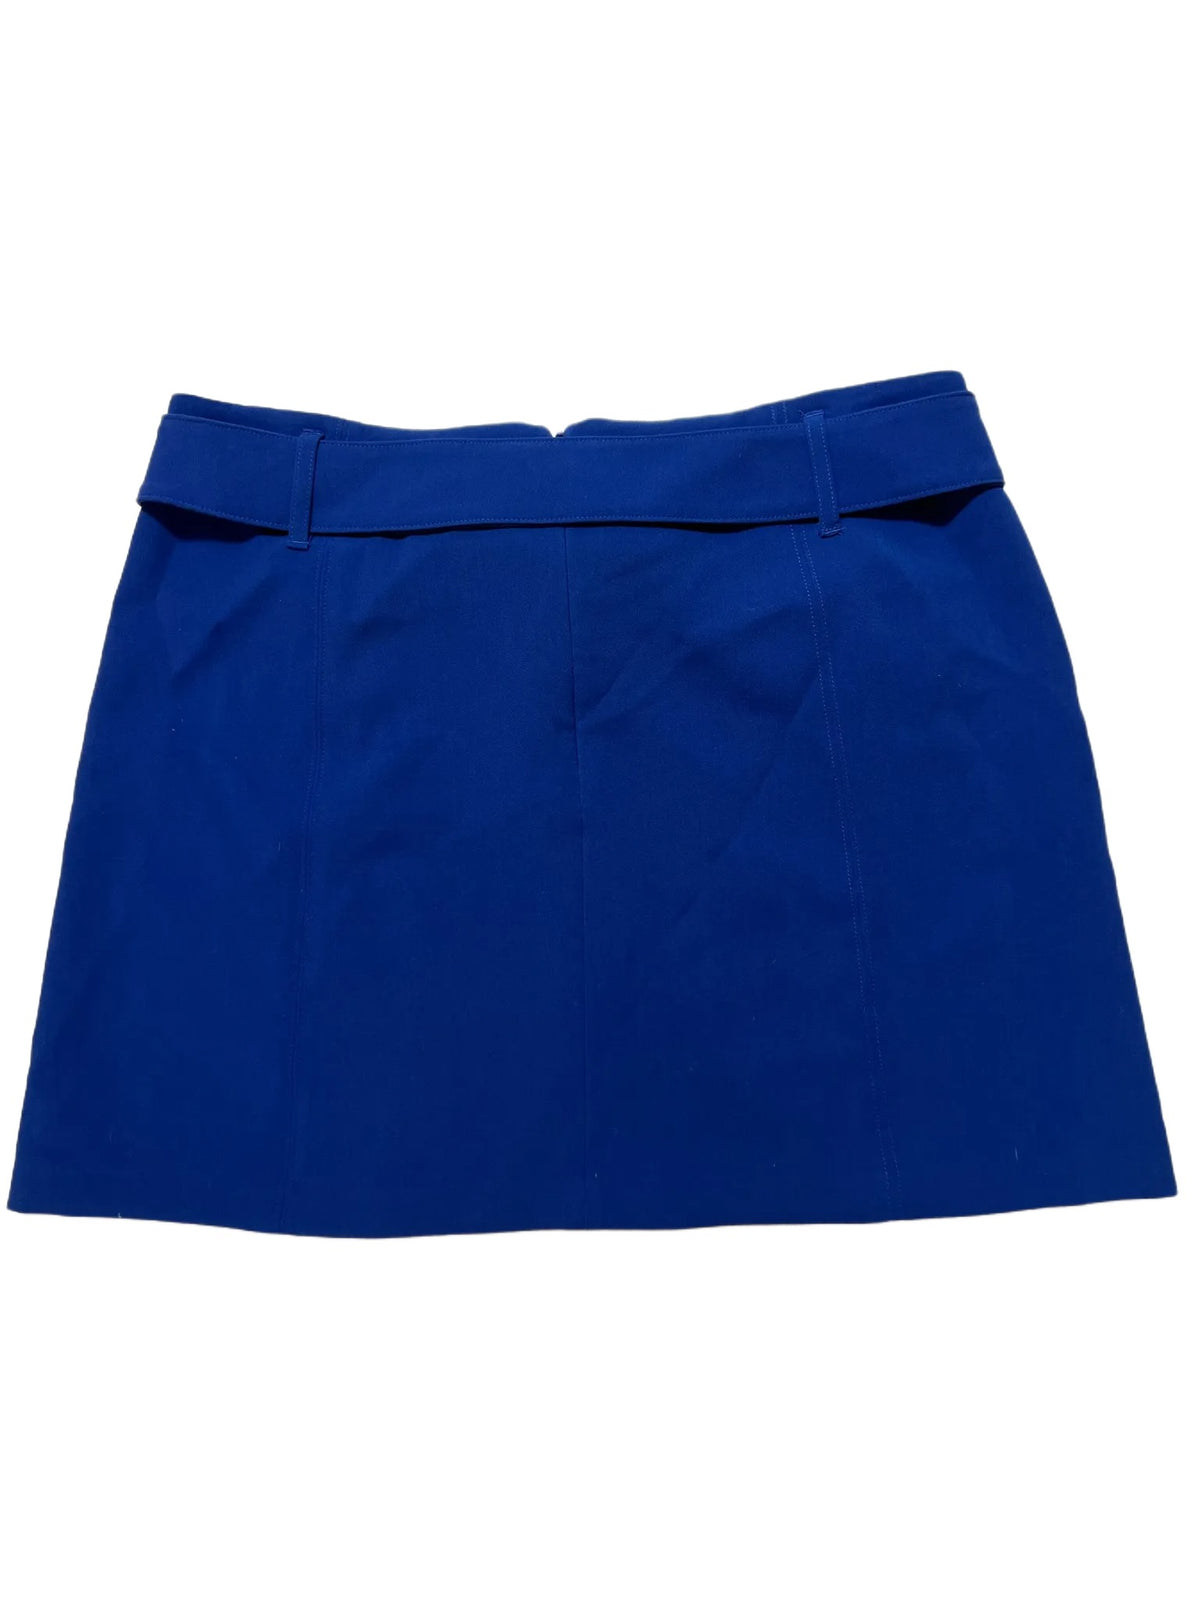 Dynamite- Blue Mini Skirt New With Tags!